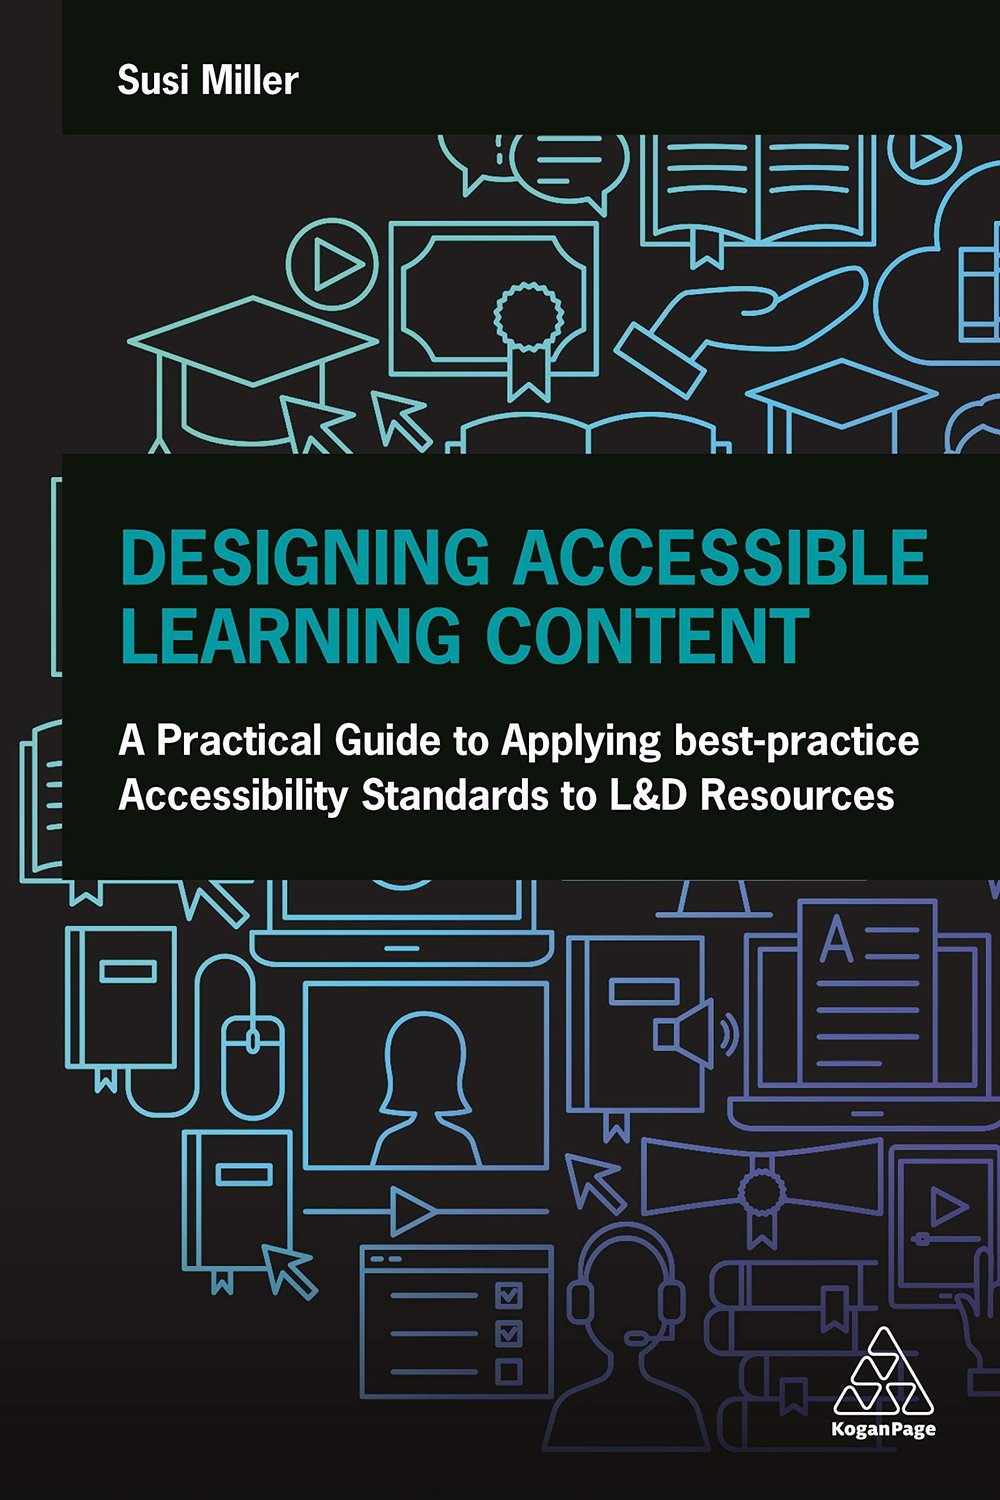 Designing Accessible Learning Content by Susi Miller